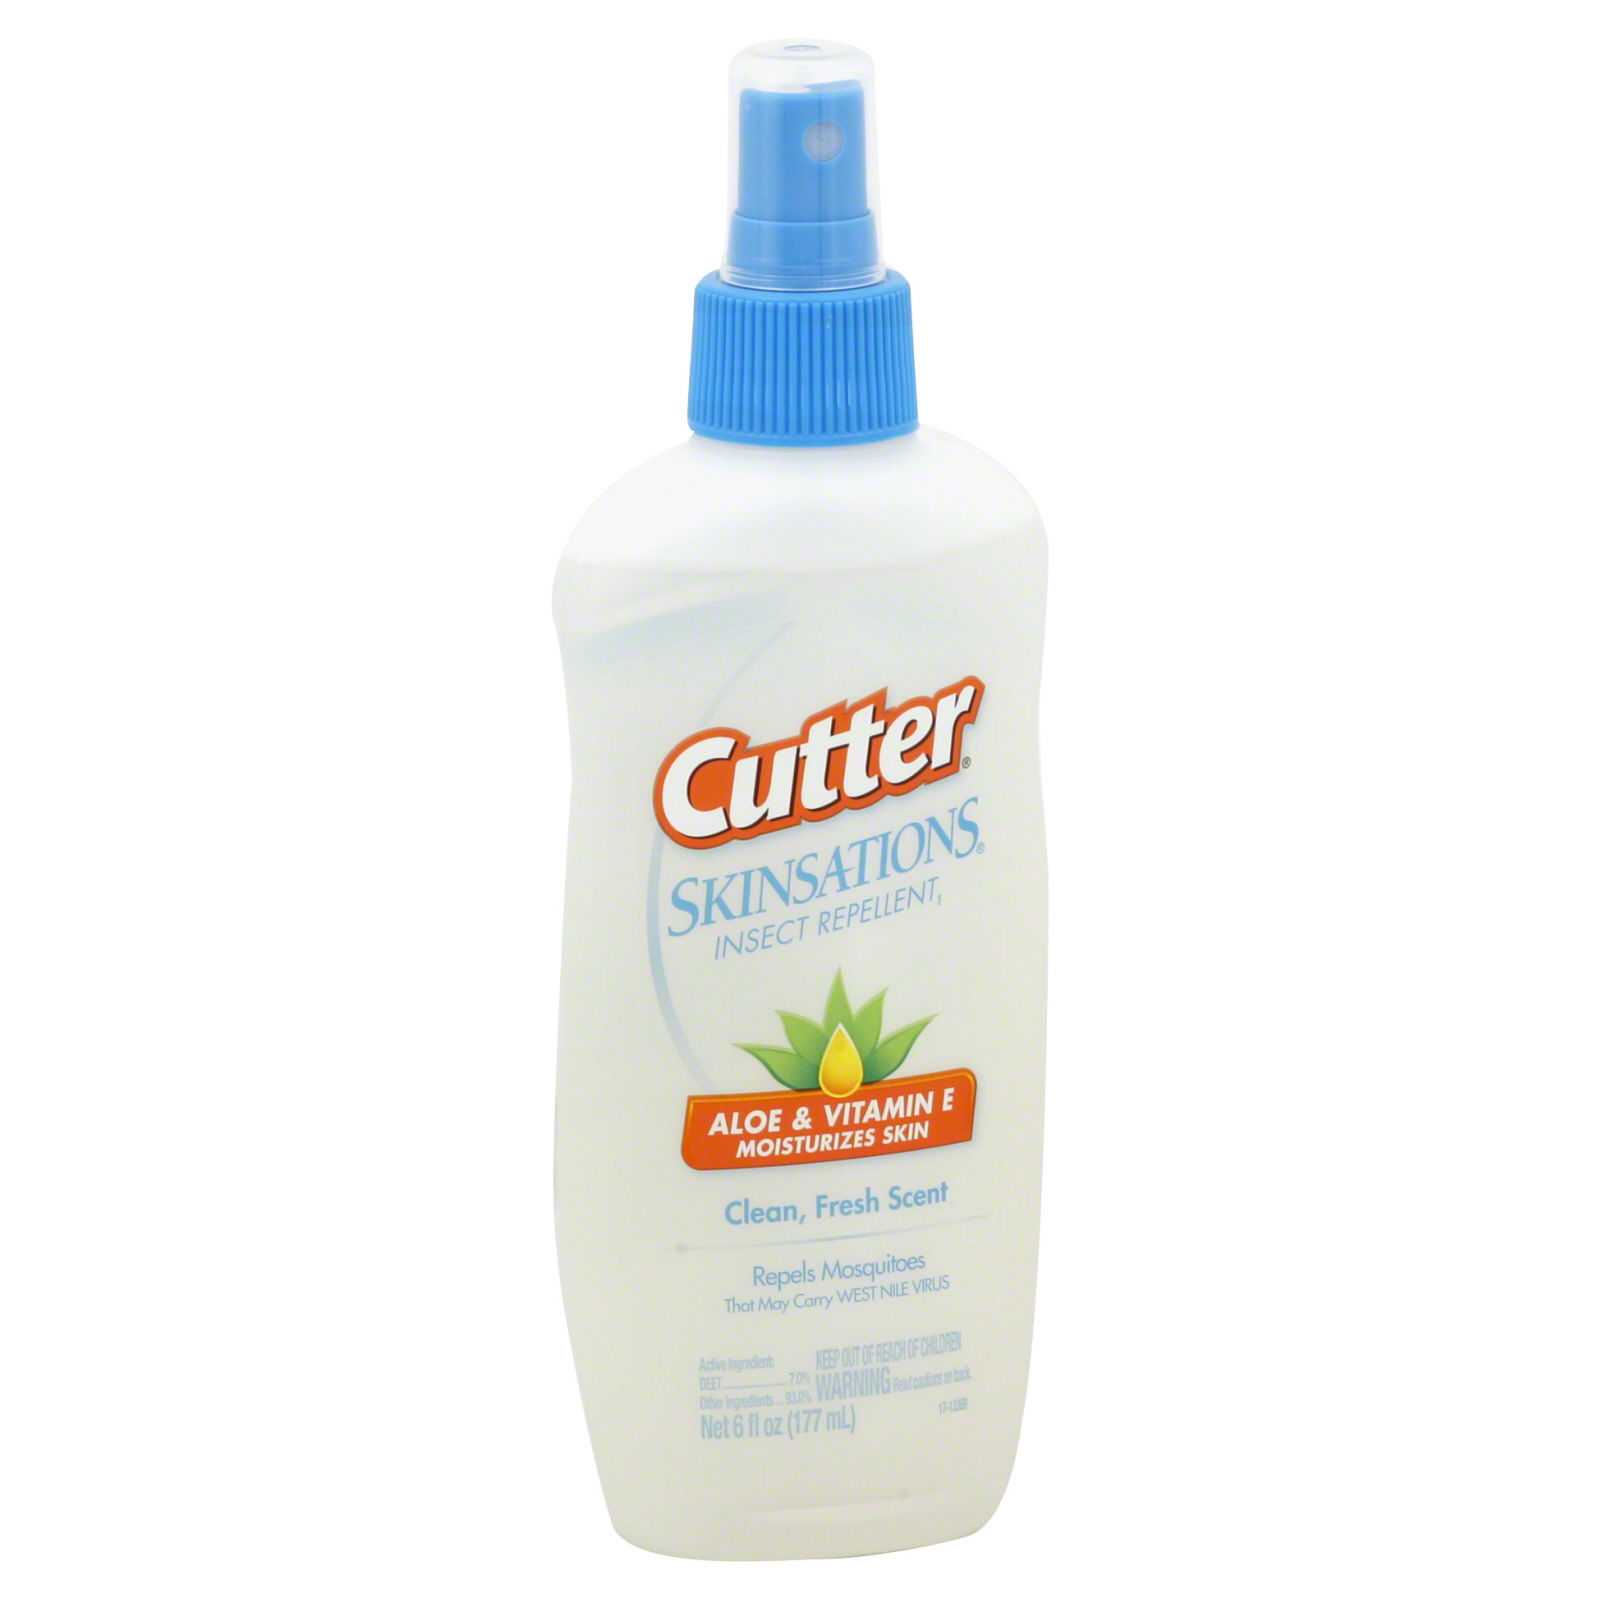 Cutter Skinsations Insect Repellent, Clean Fresh Scent, 6 fl oz